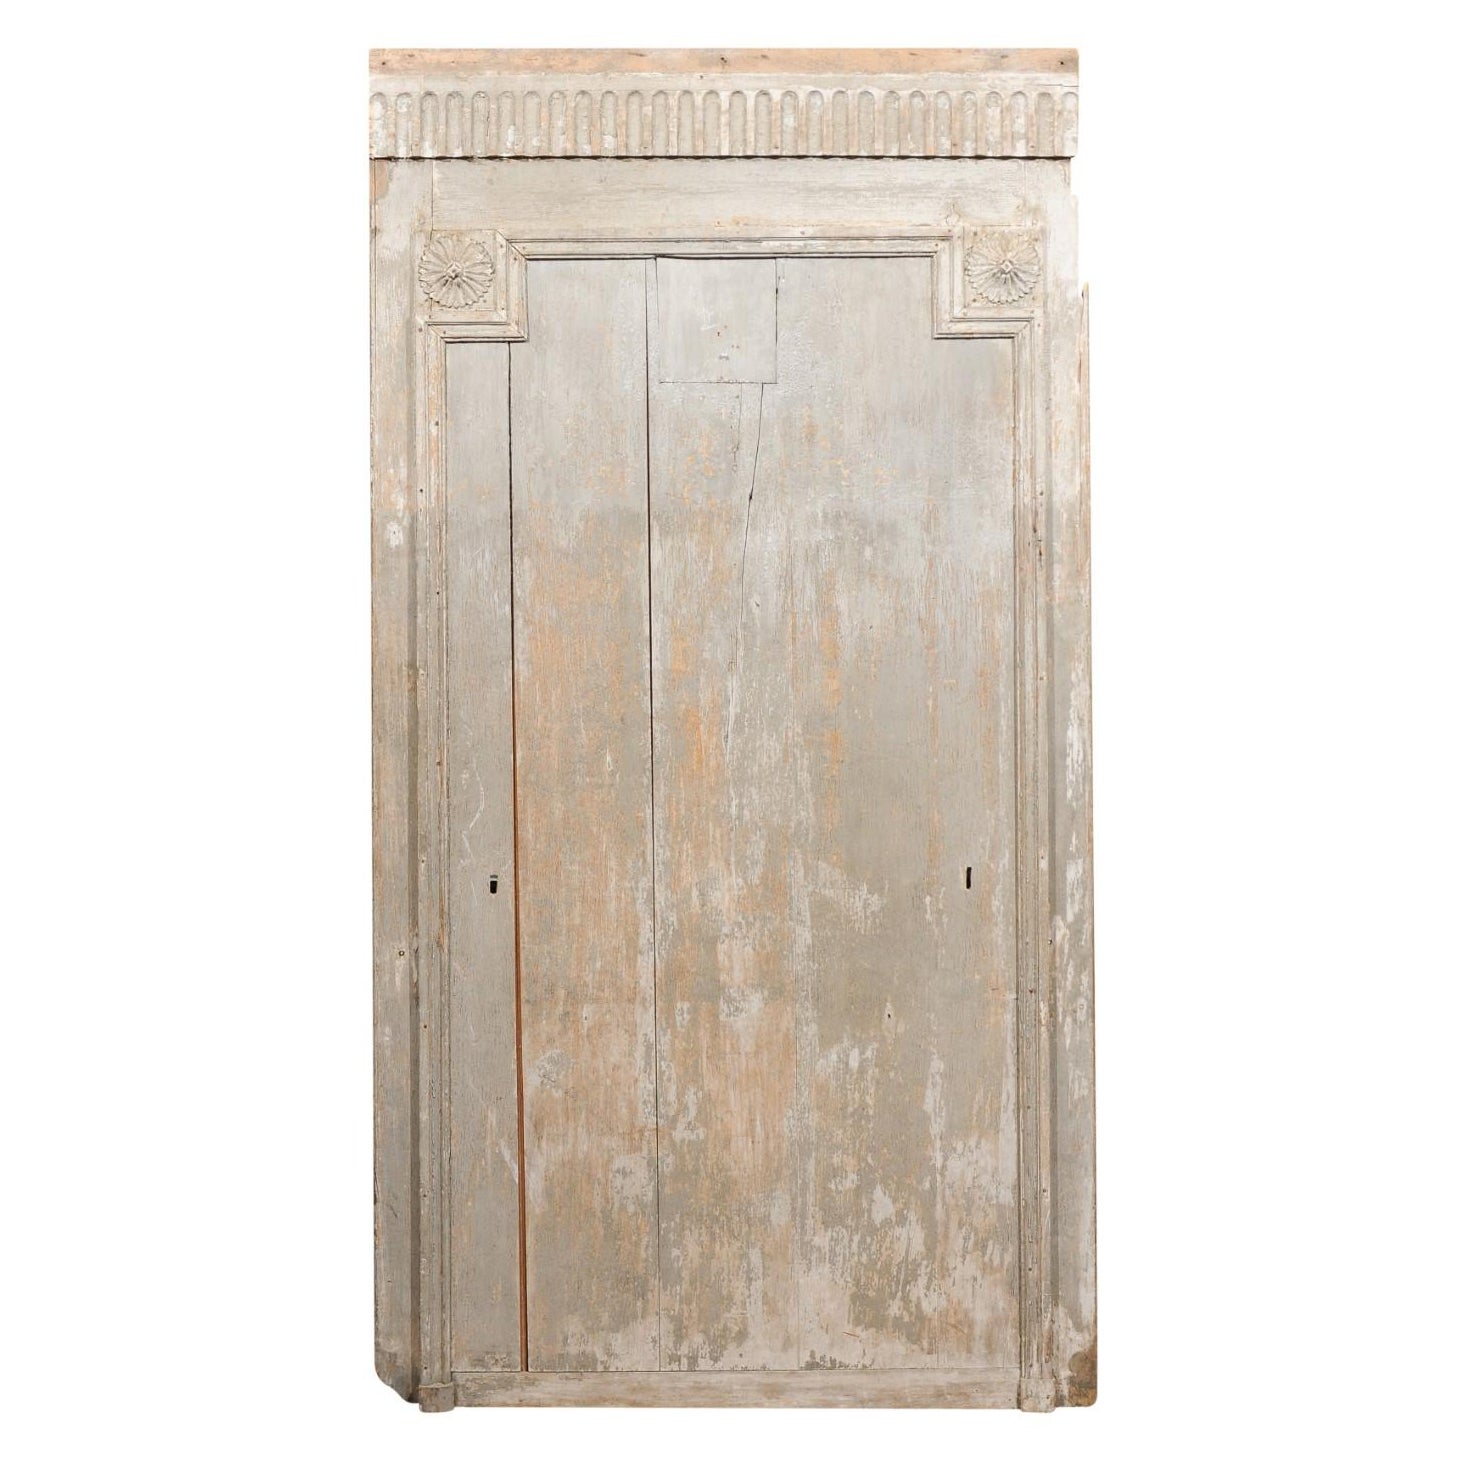 Late 18th Century French Painted Architectural Panel For Sale